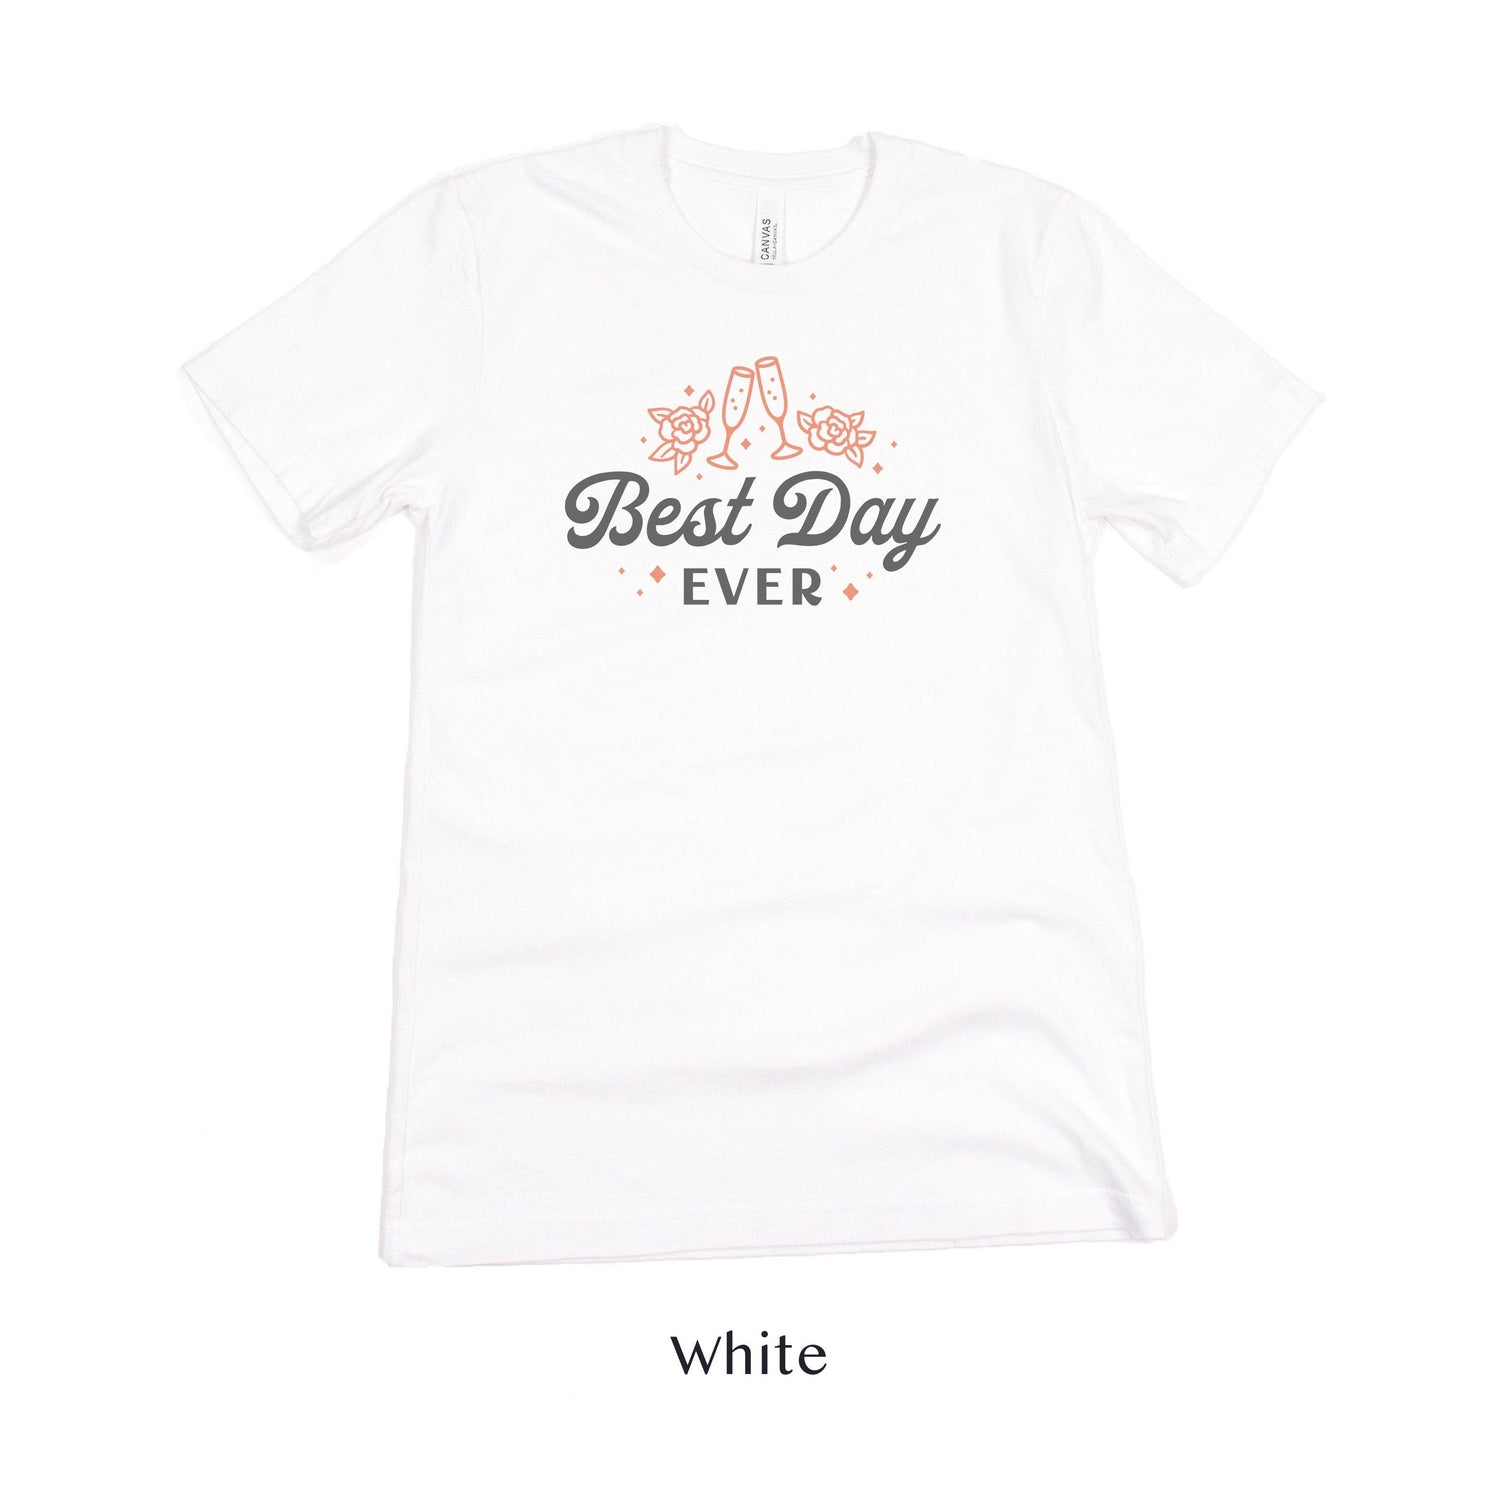 Best Day Ever! Champagne Toast Wedding Day Short-Sleeve Tee - Plus Sizes Available! by Oaklynn Lane - White Shirt